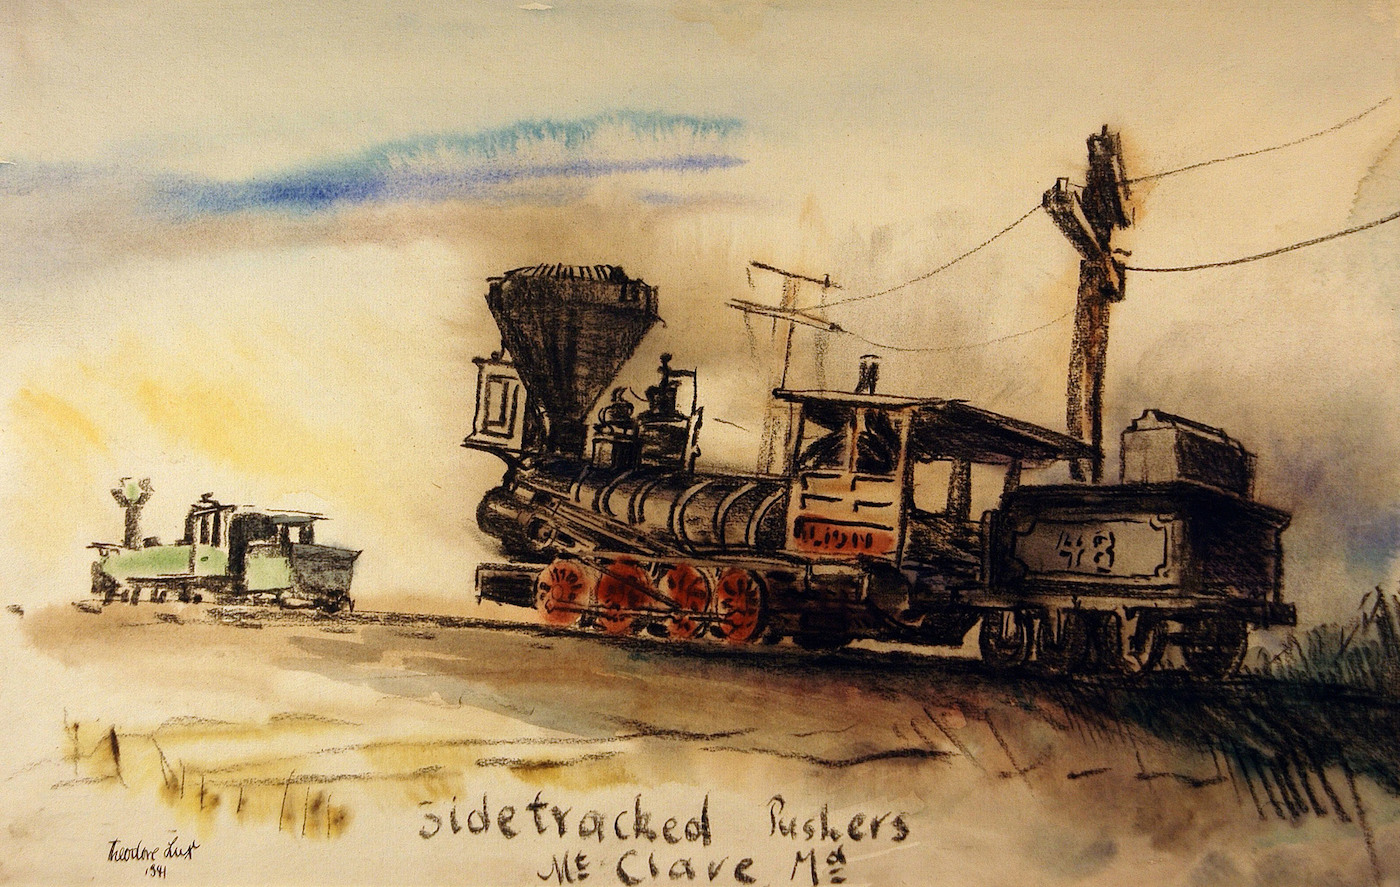 Locomotives. Sidetracked Pushers in Mt. Clare, Maryland